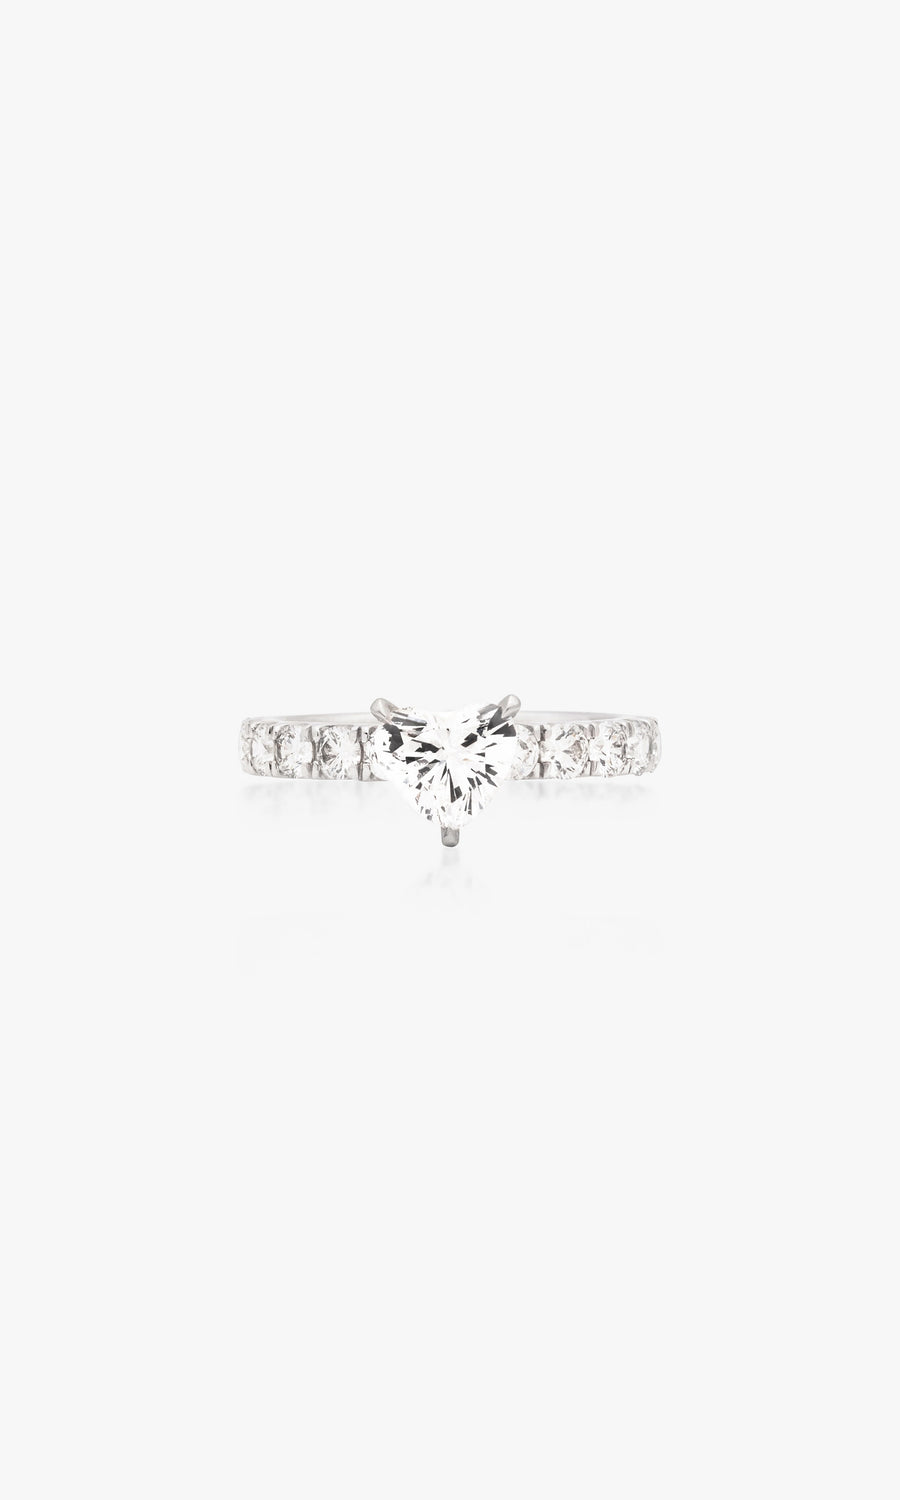 LE GRAND AMOUR HEART RING 1.04 Carat